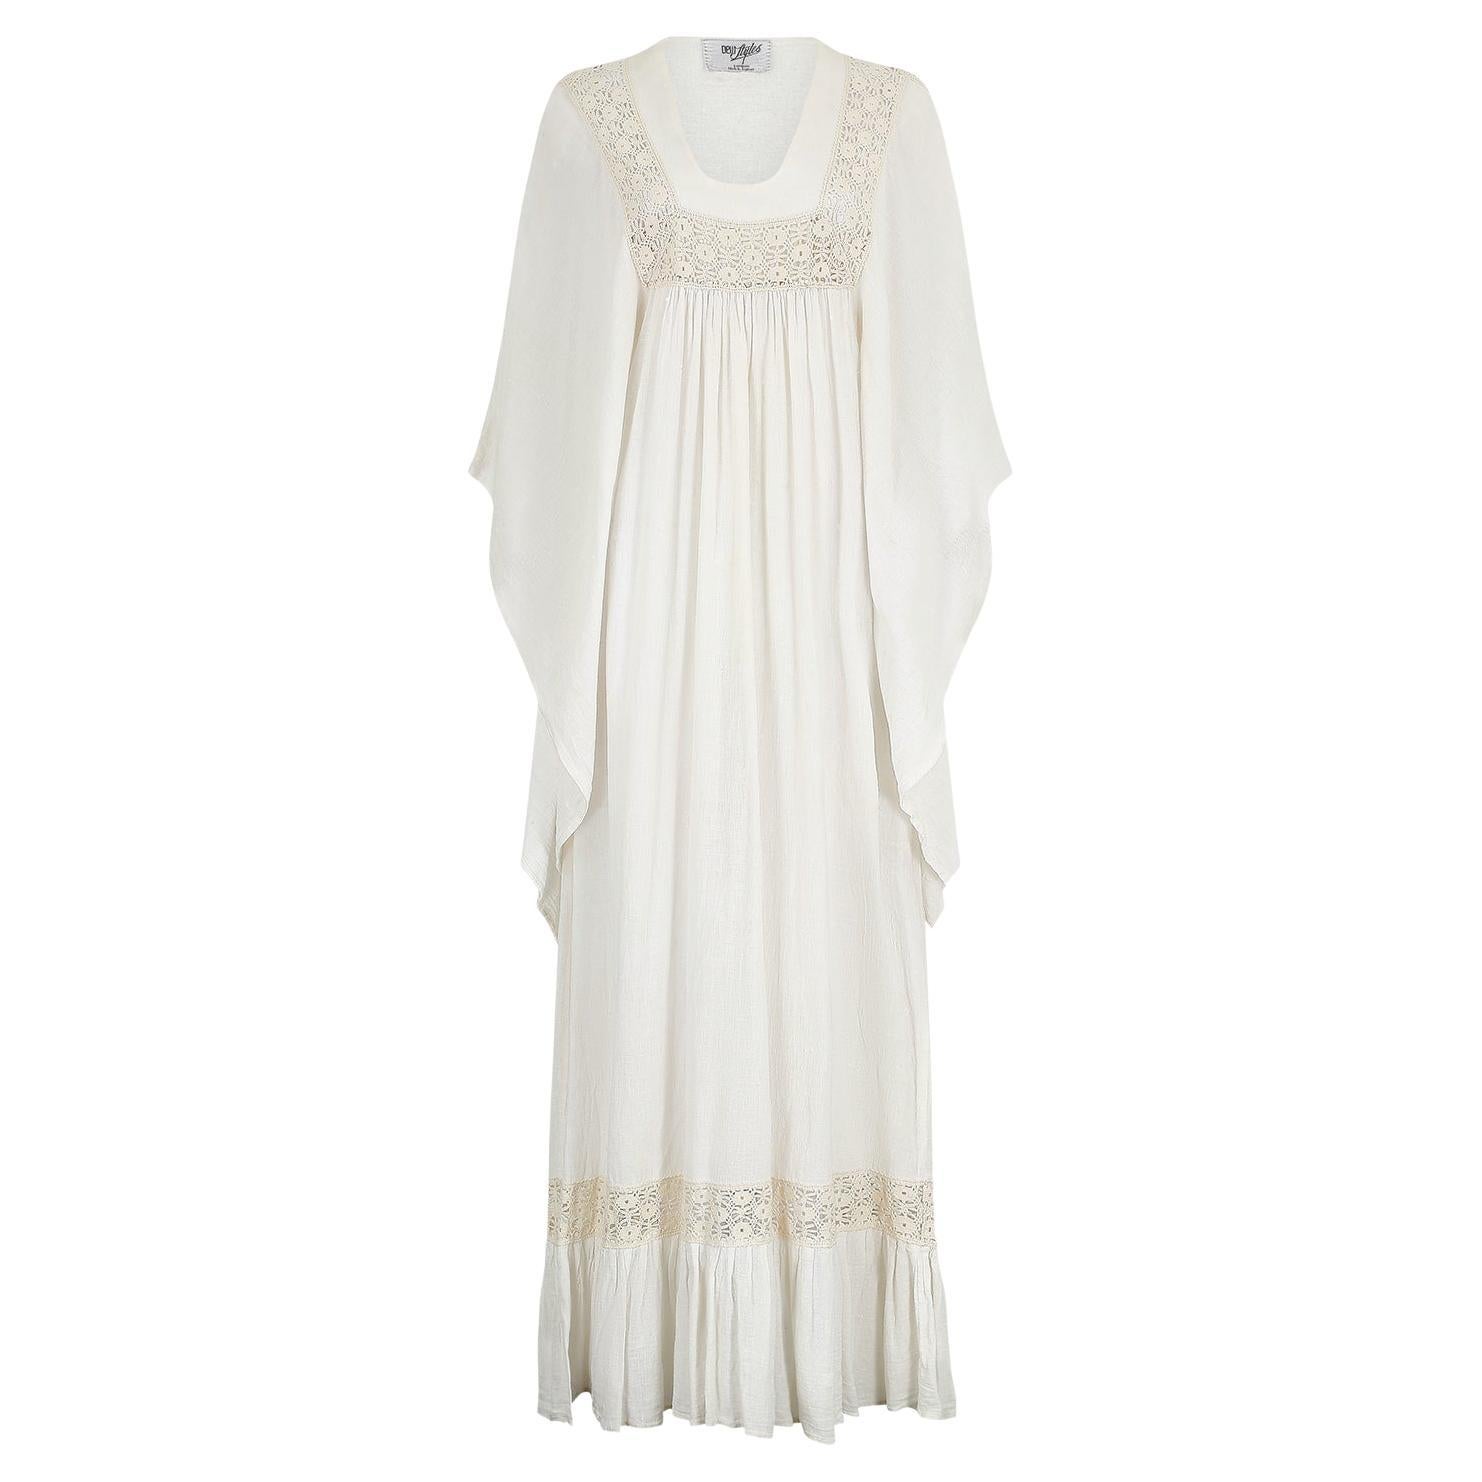 1970s Dew Styles White Cotton Angel-Sleeve Dress For Sale